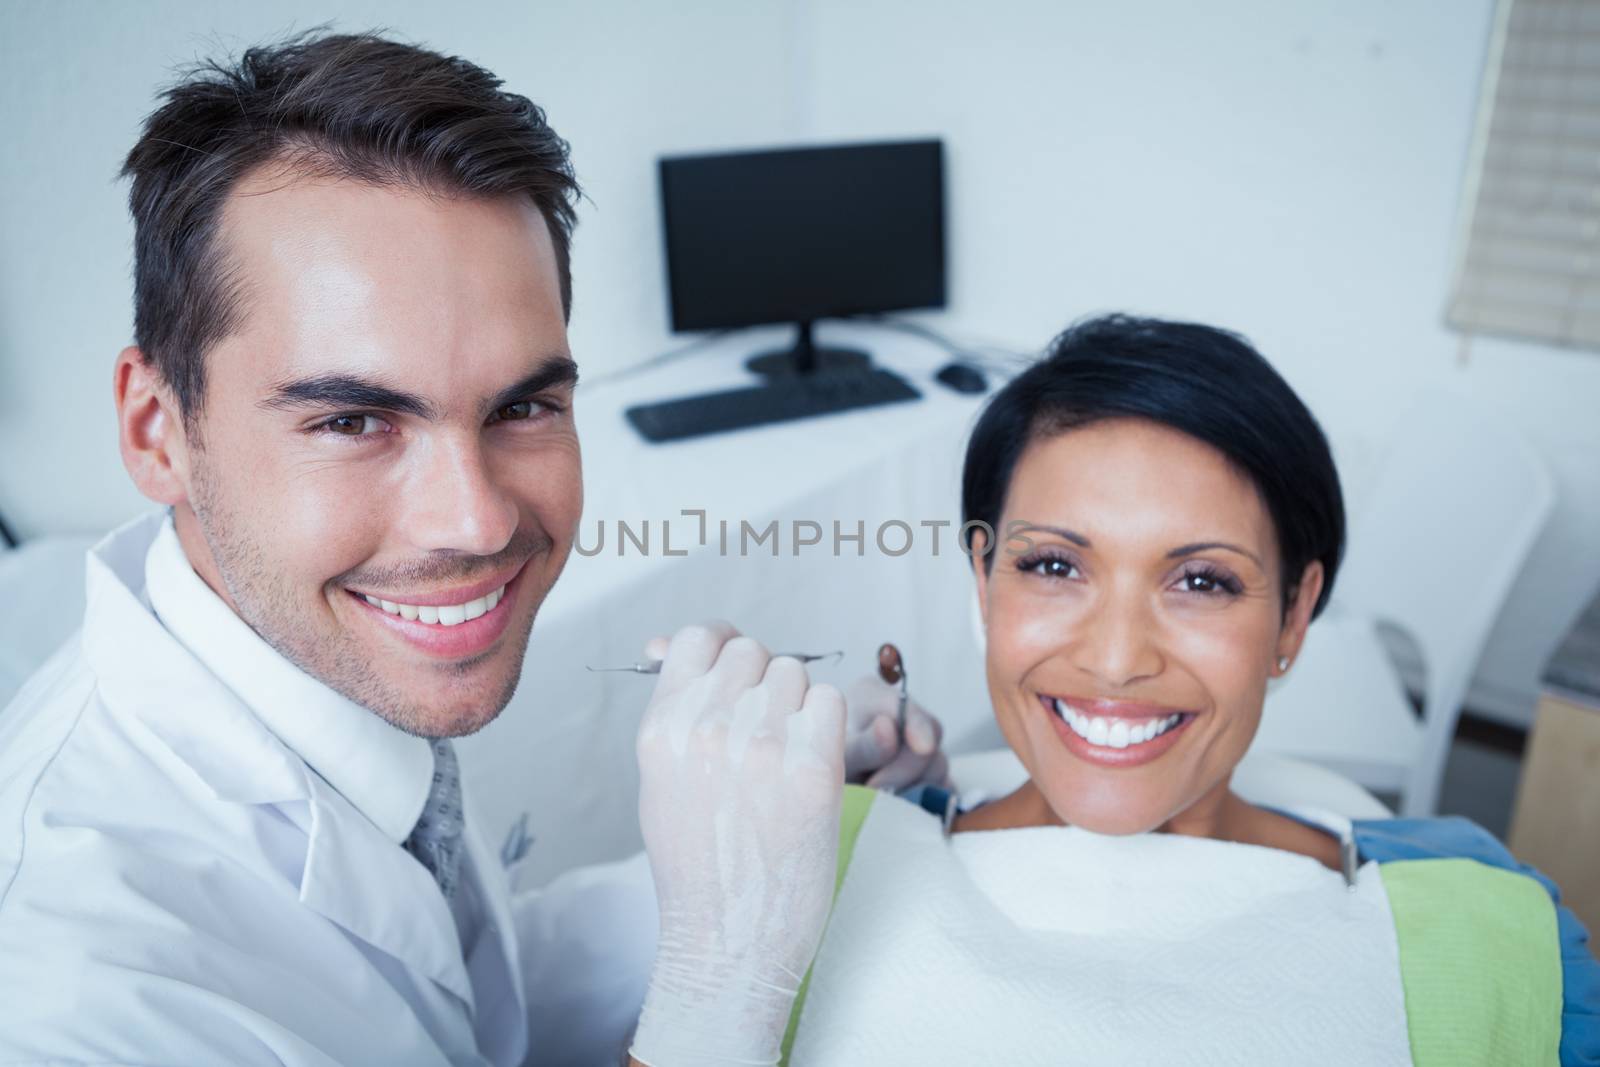 Male dentist examining womans teeth in the dentists chair